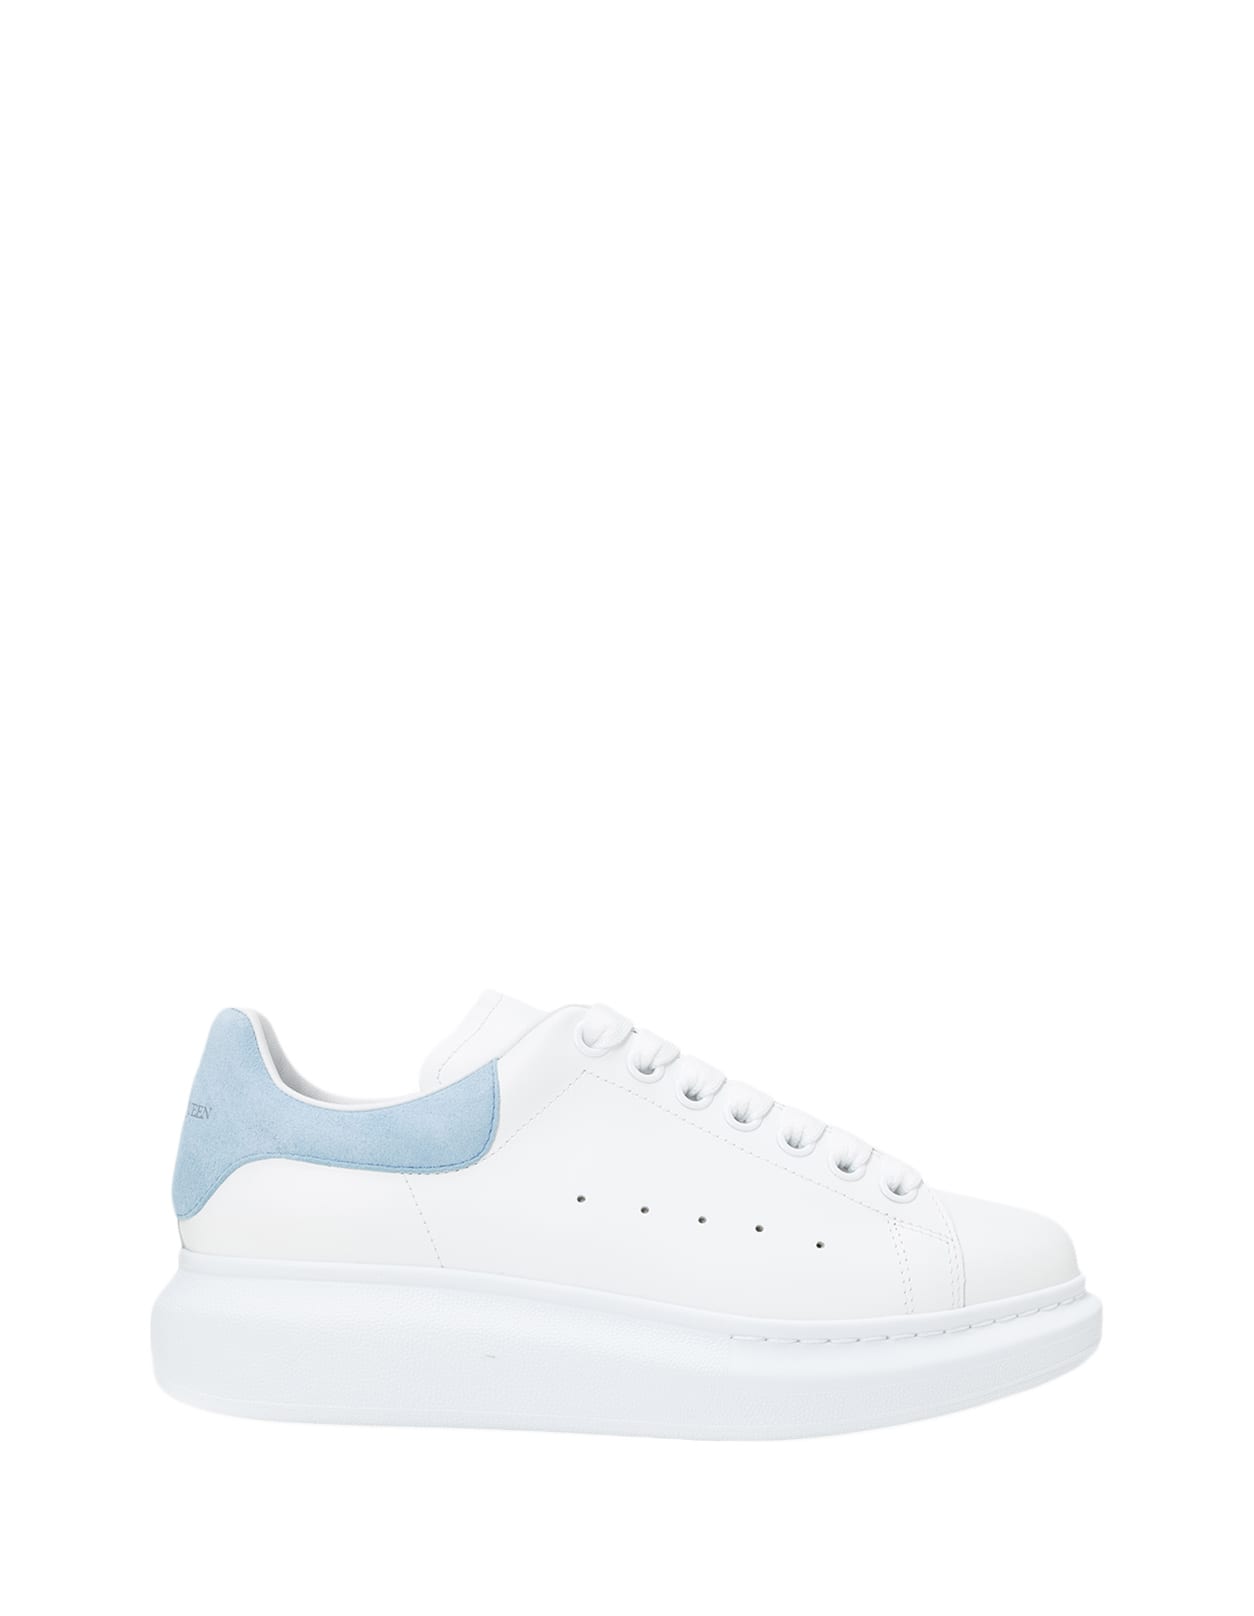 ALEXANDER MCQUEEN WHITE OVERSIZED SNEAKERS WITH LIGHT BLUE SUEDE SPOILER